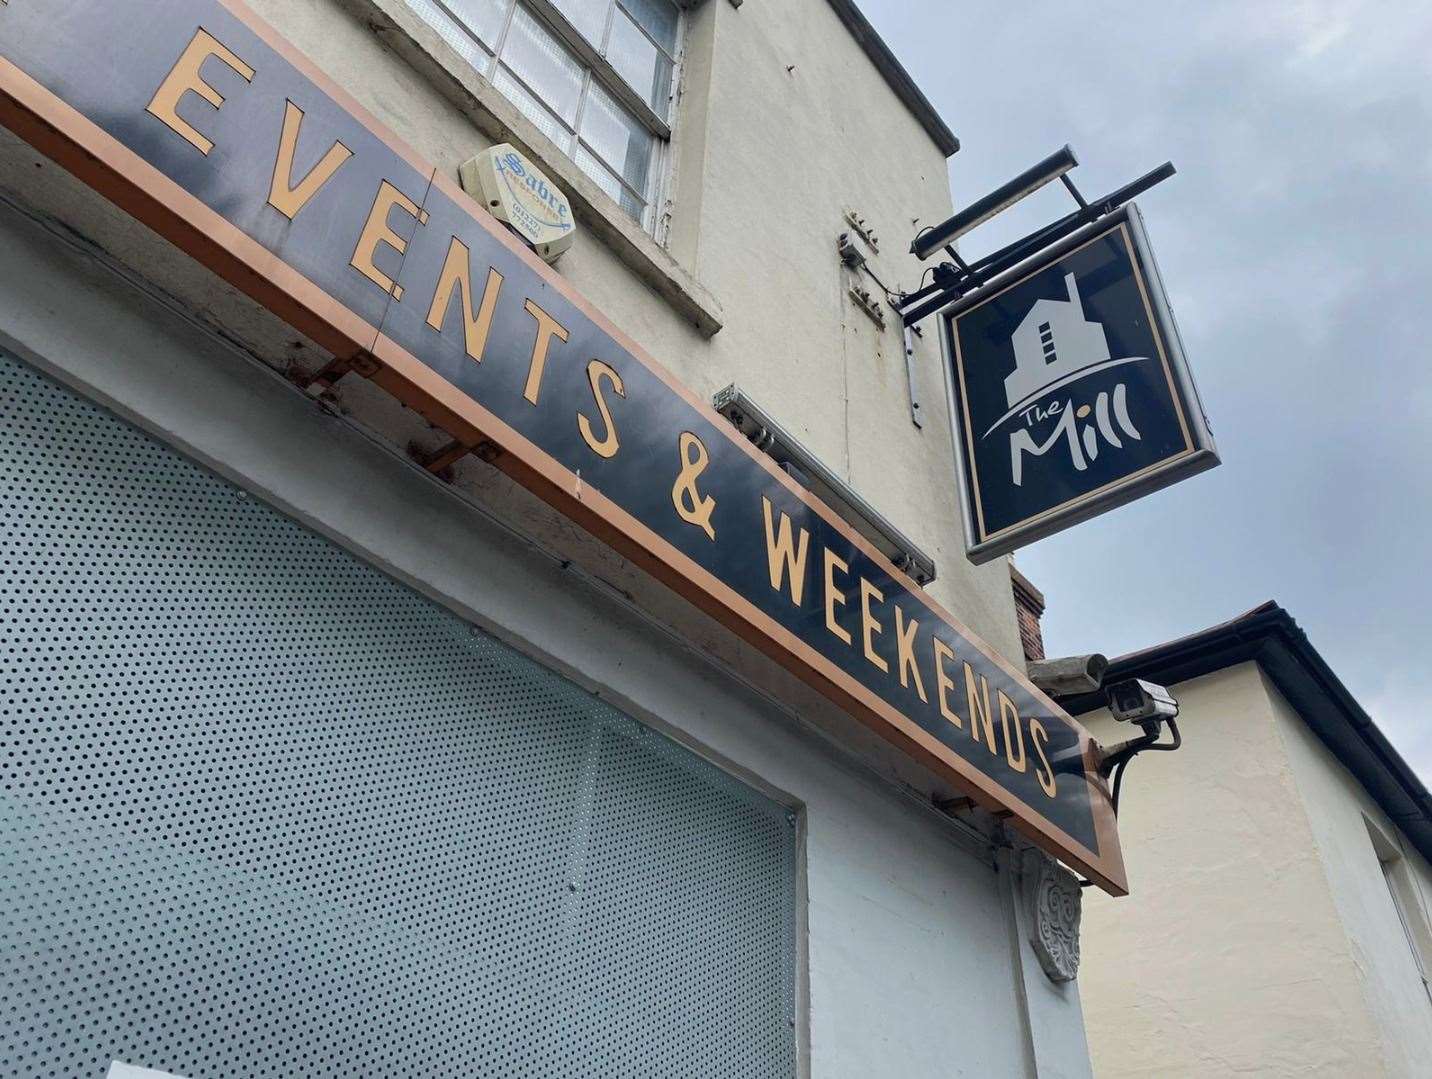 The new owners of a pub that police effectively forced into closure wants to convert the site into homes